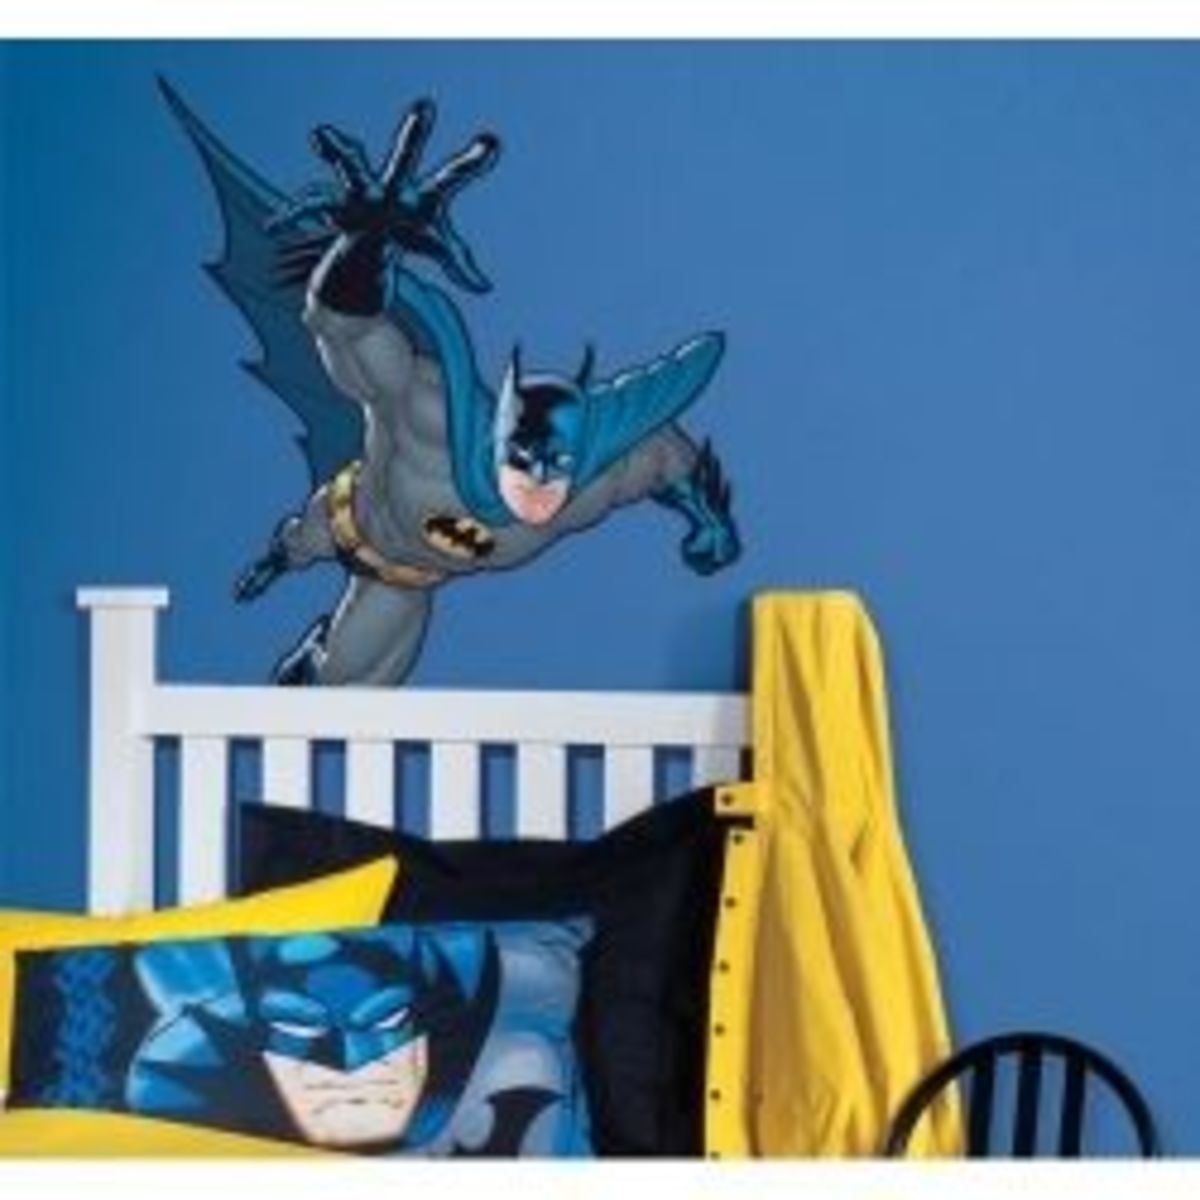 How to Make a Batman Themed Bedroom